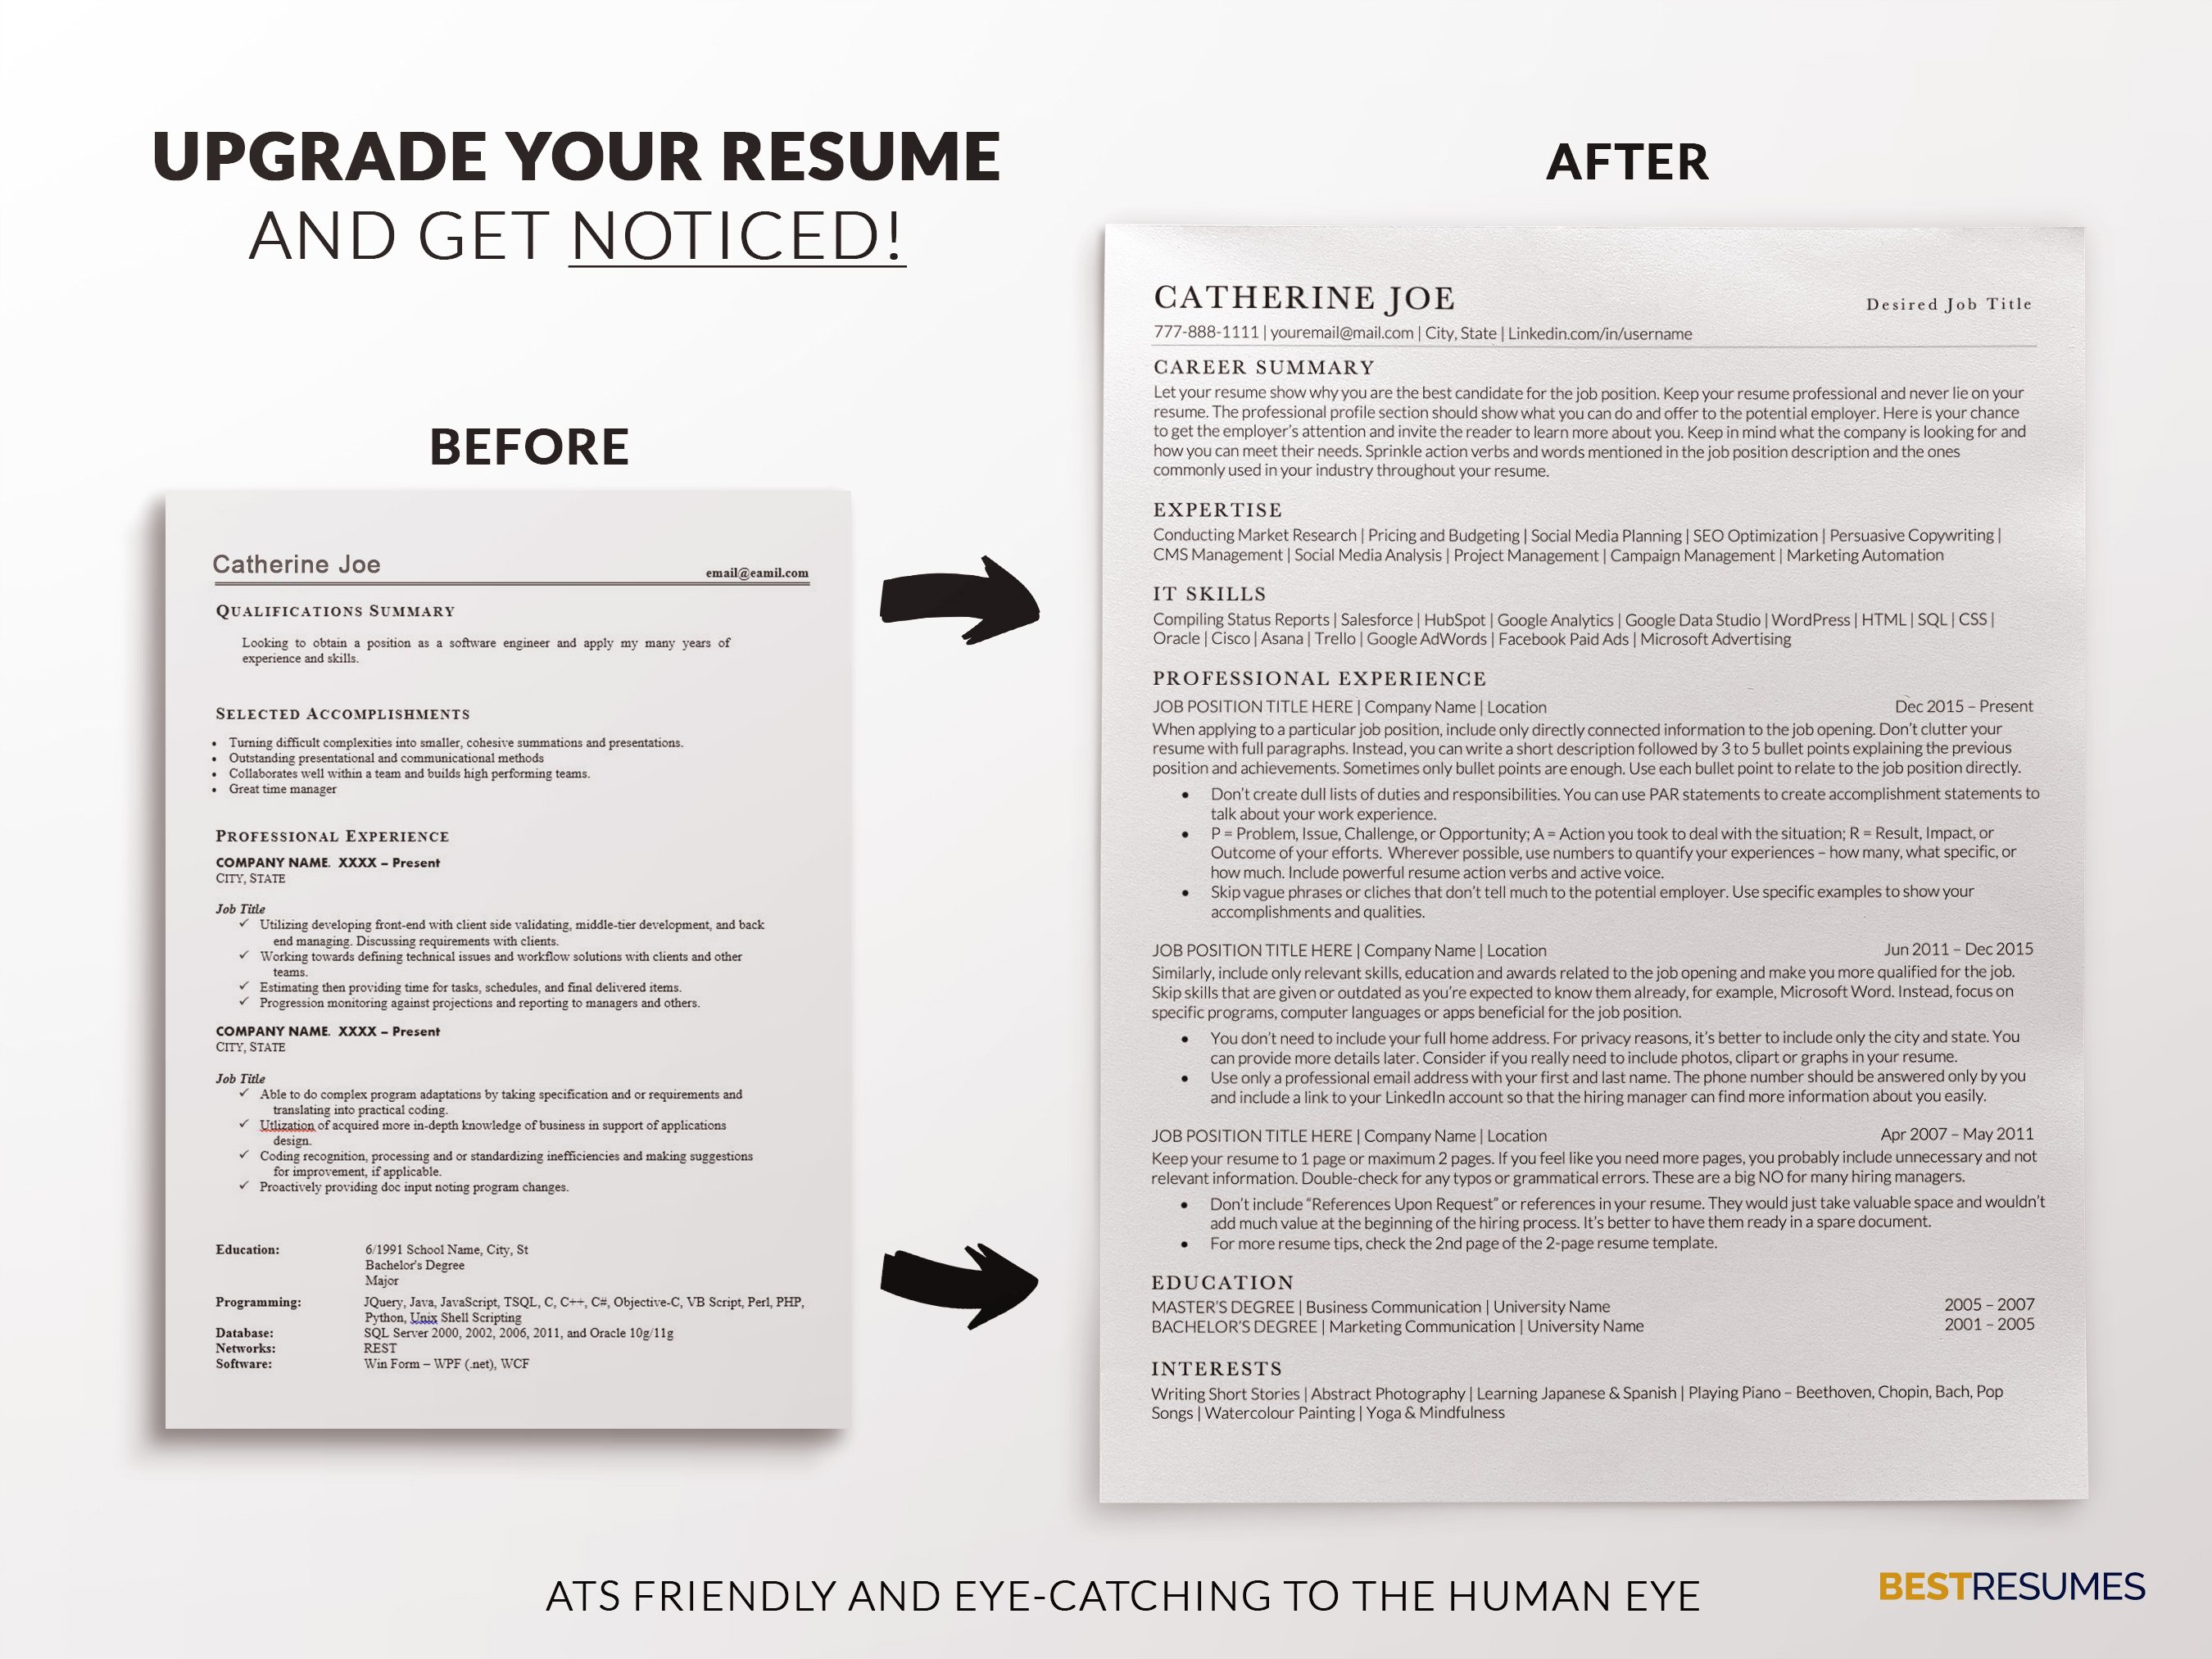 resume for pages resume transformation catherine joe 191